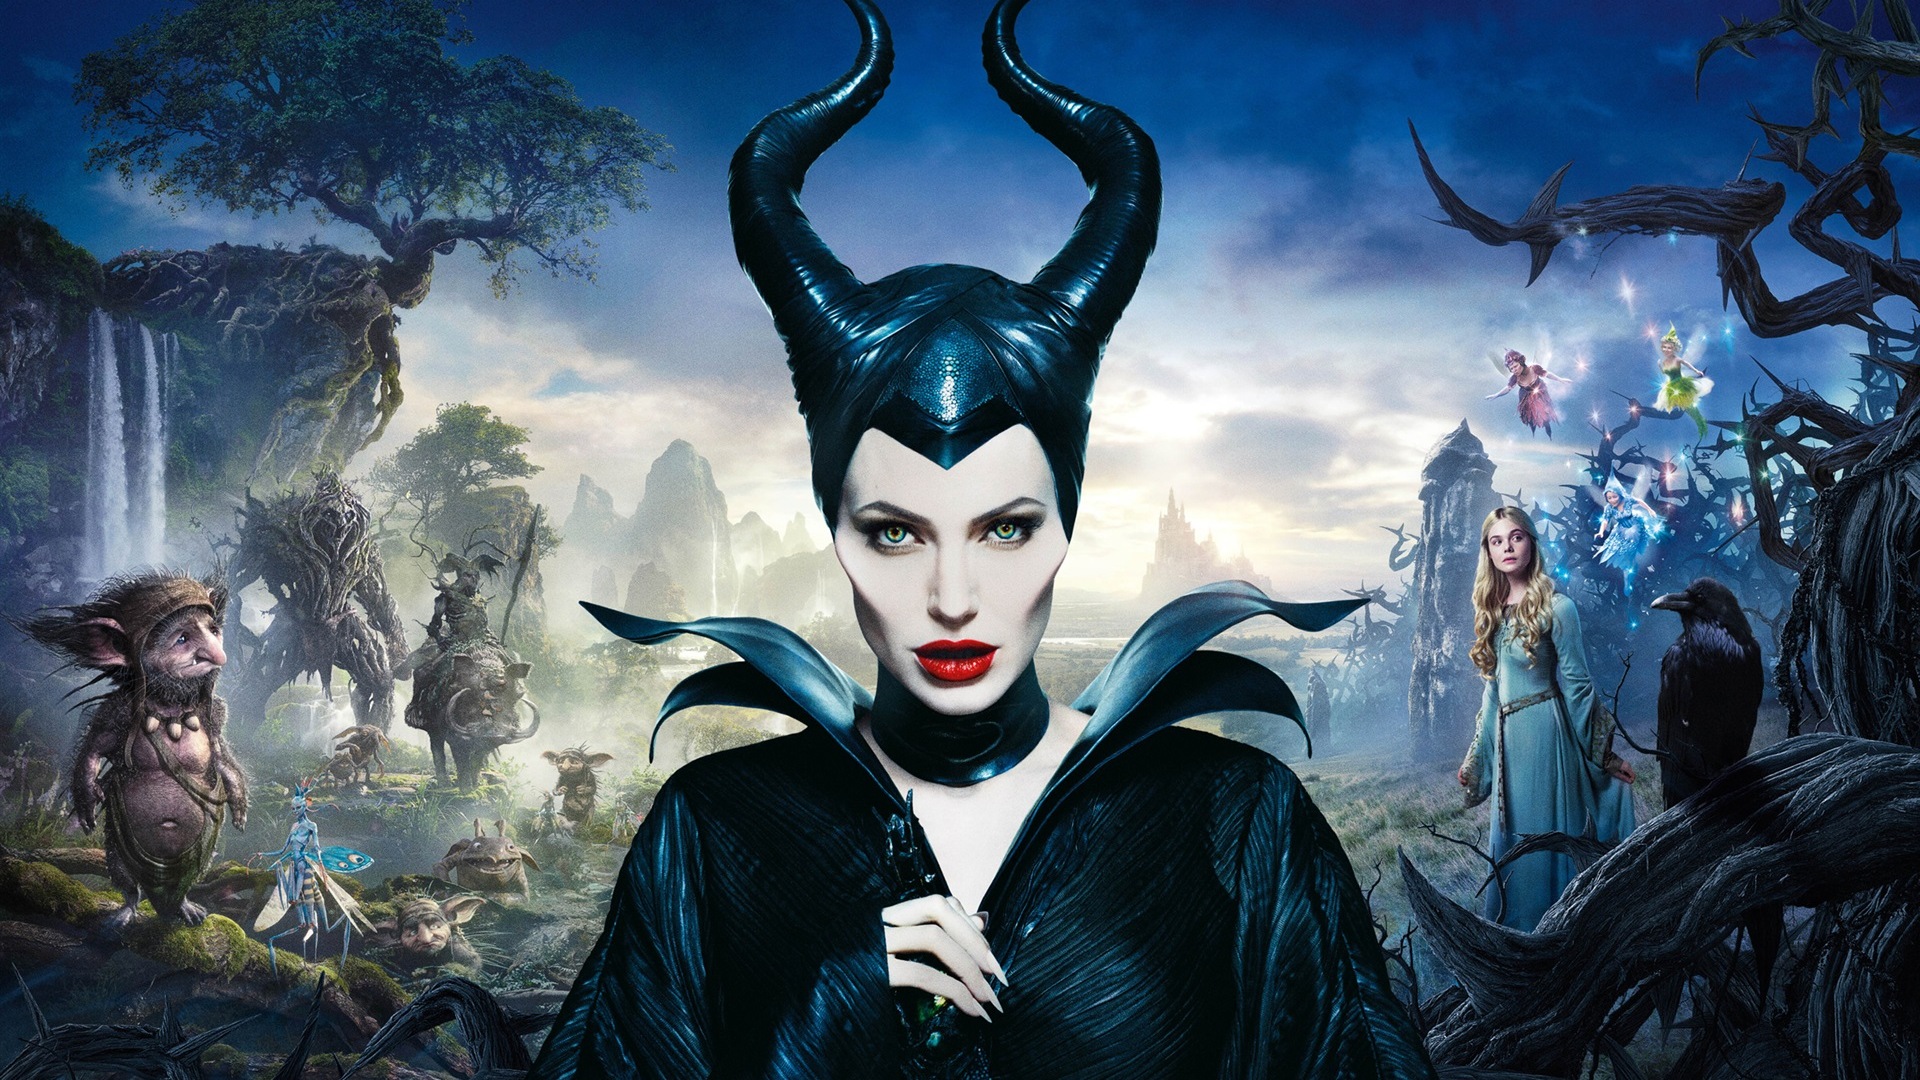 Maleficent 2014 HD movie wallpapers #6 - 1920x1080